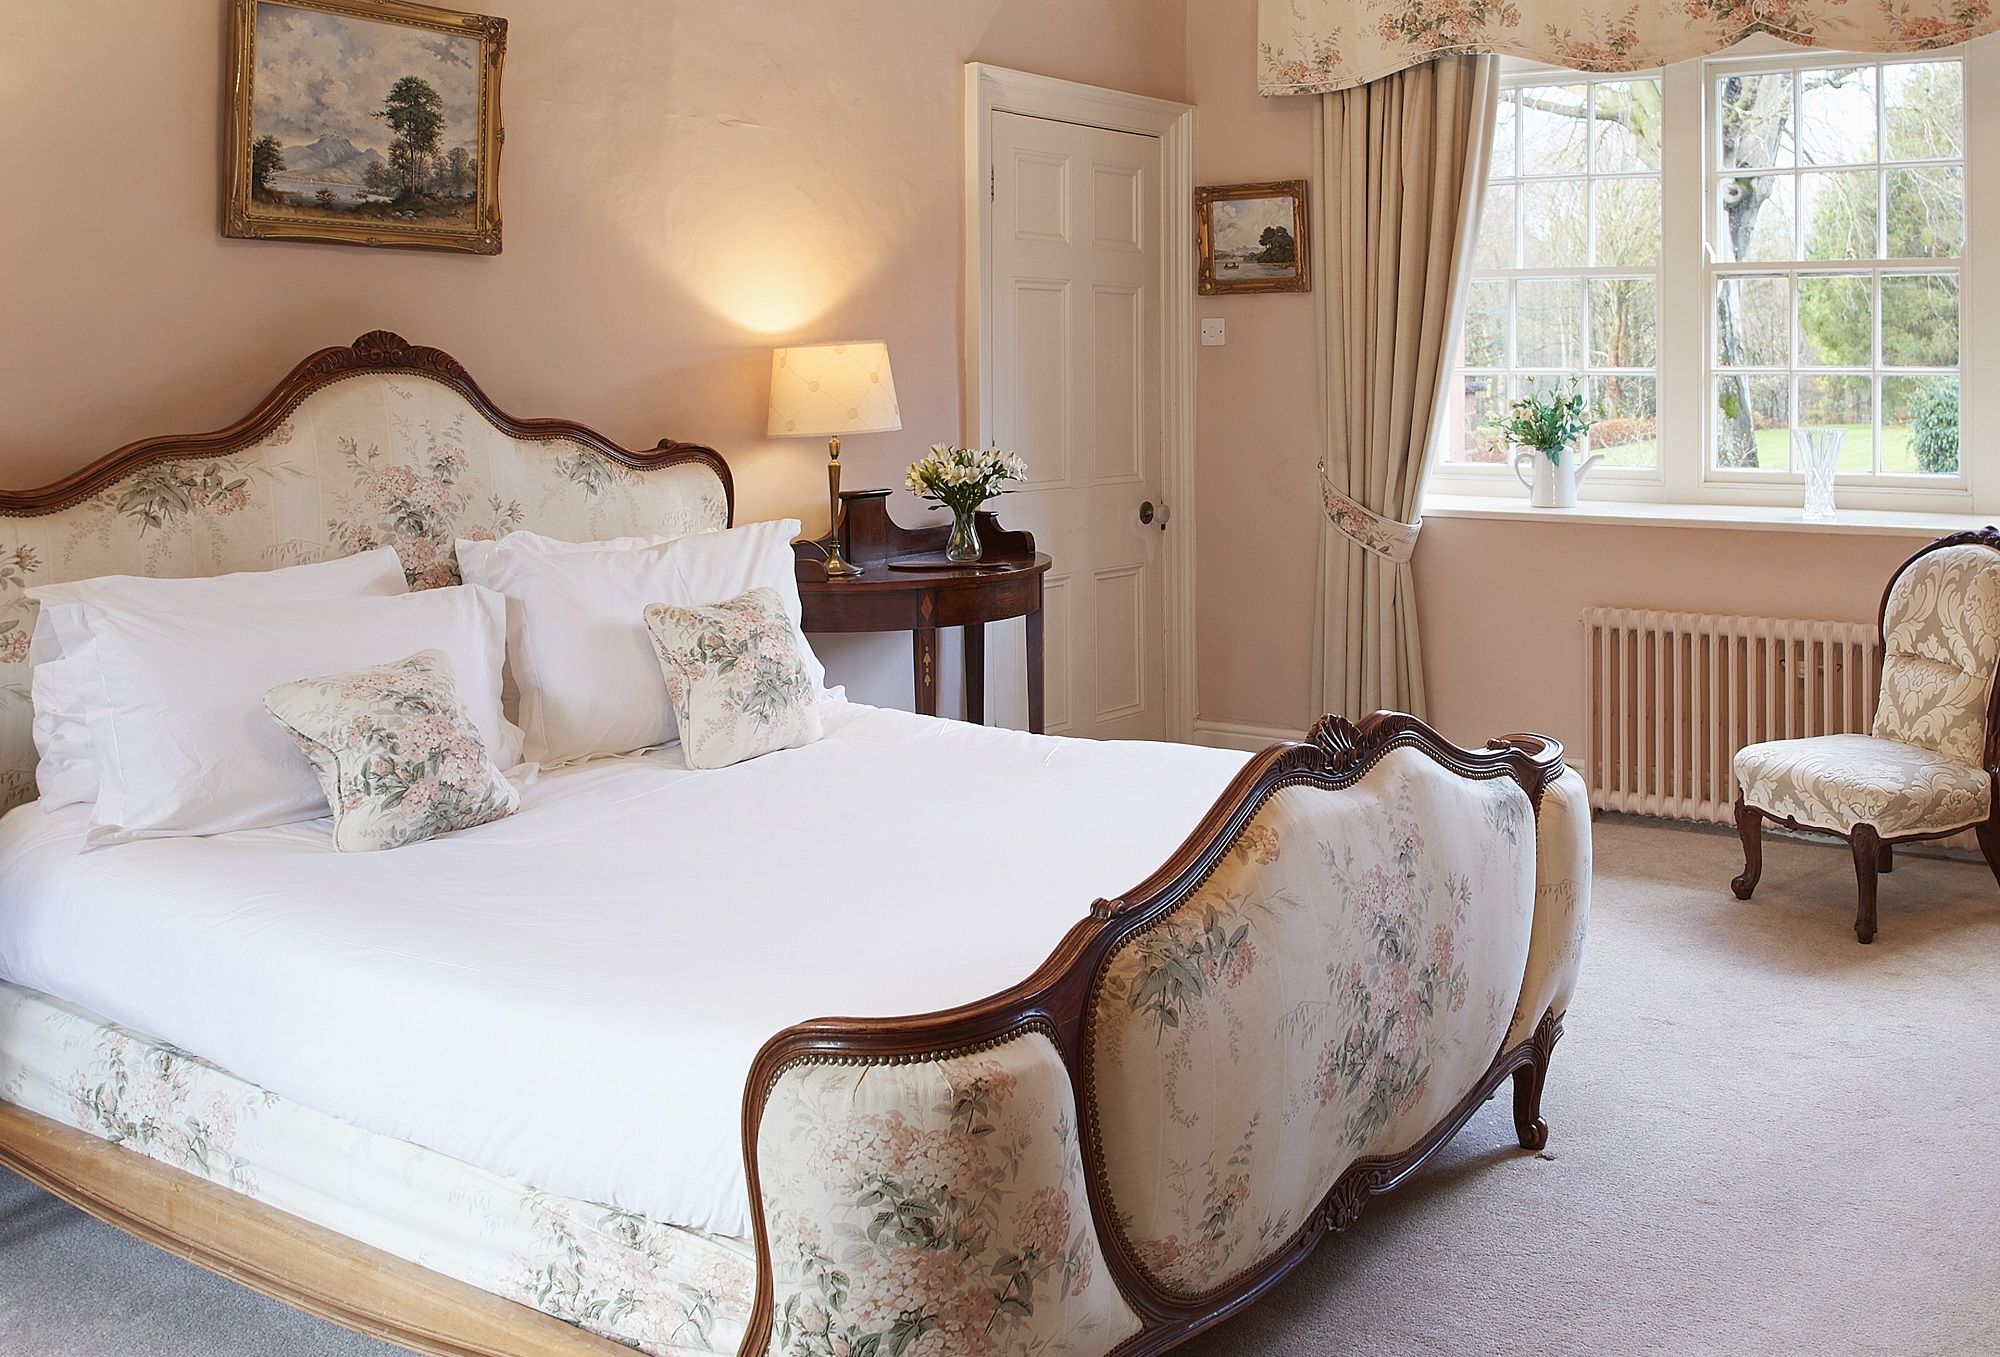 Melmerby Hall ensuite Master Bedroom with six foot superking bed overlooking the gardens luxury holiday property for family holidays large group gatherings weddings corporate retreats at The Rowley Estates